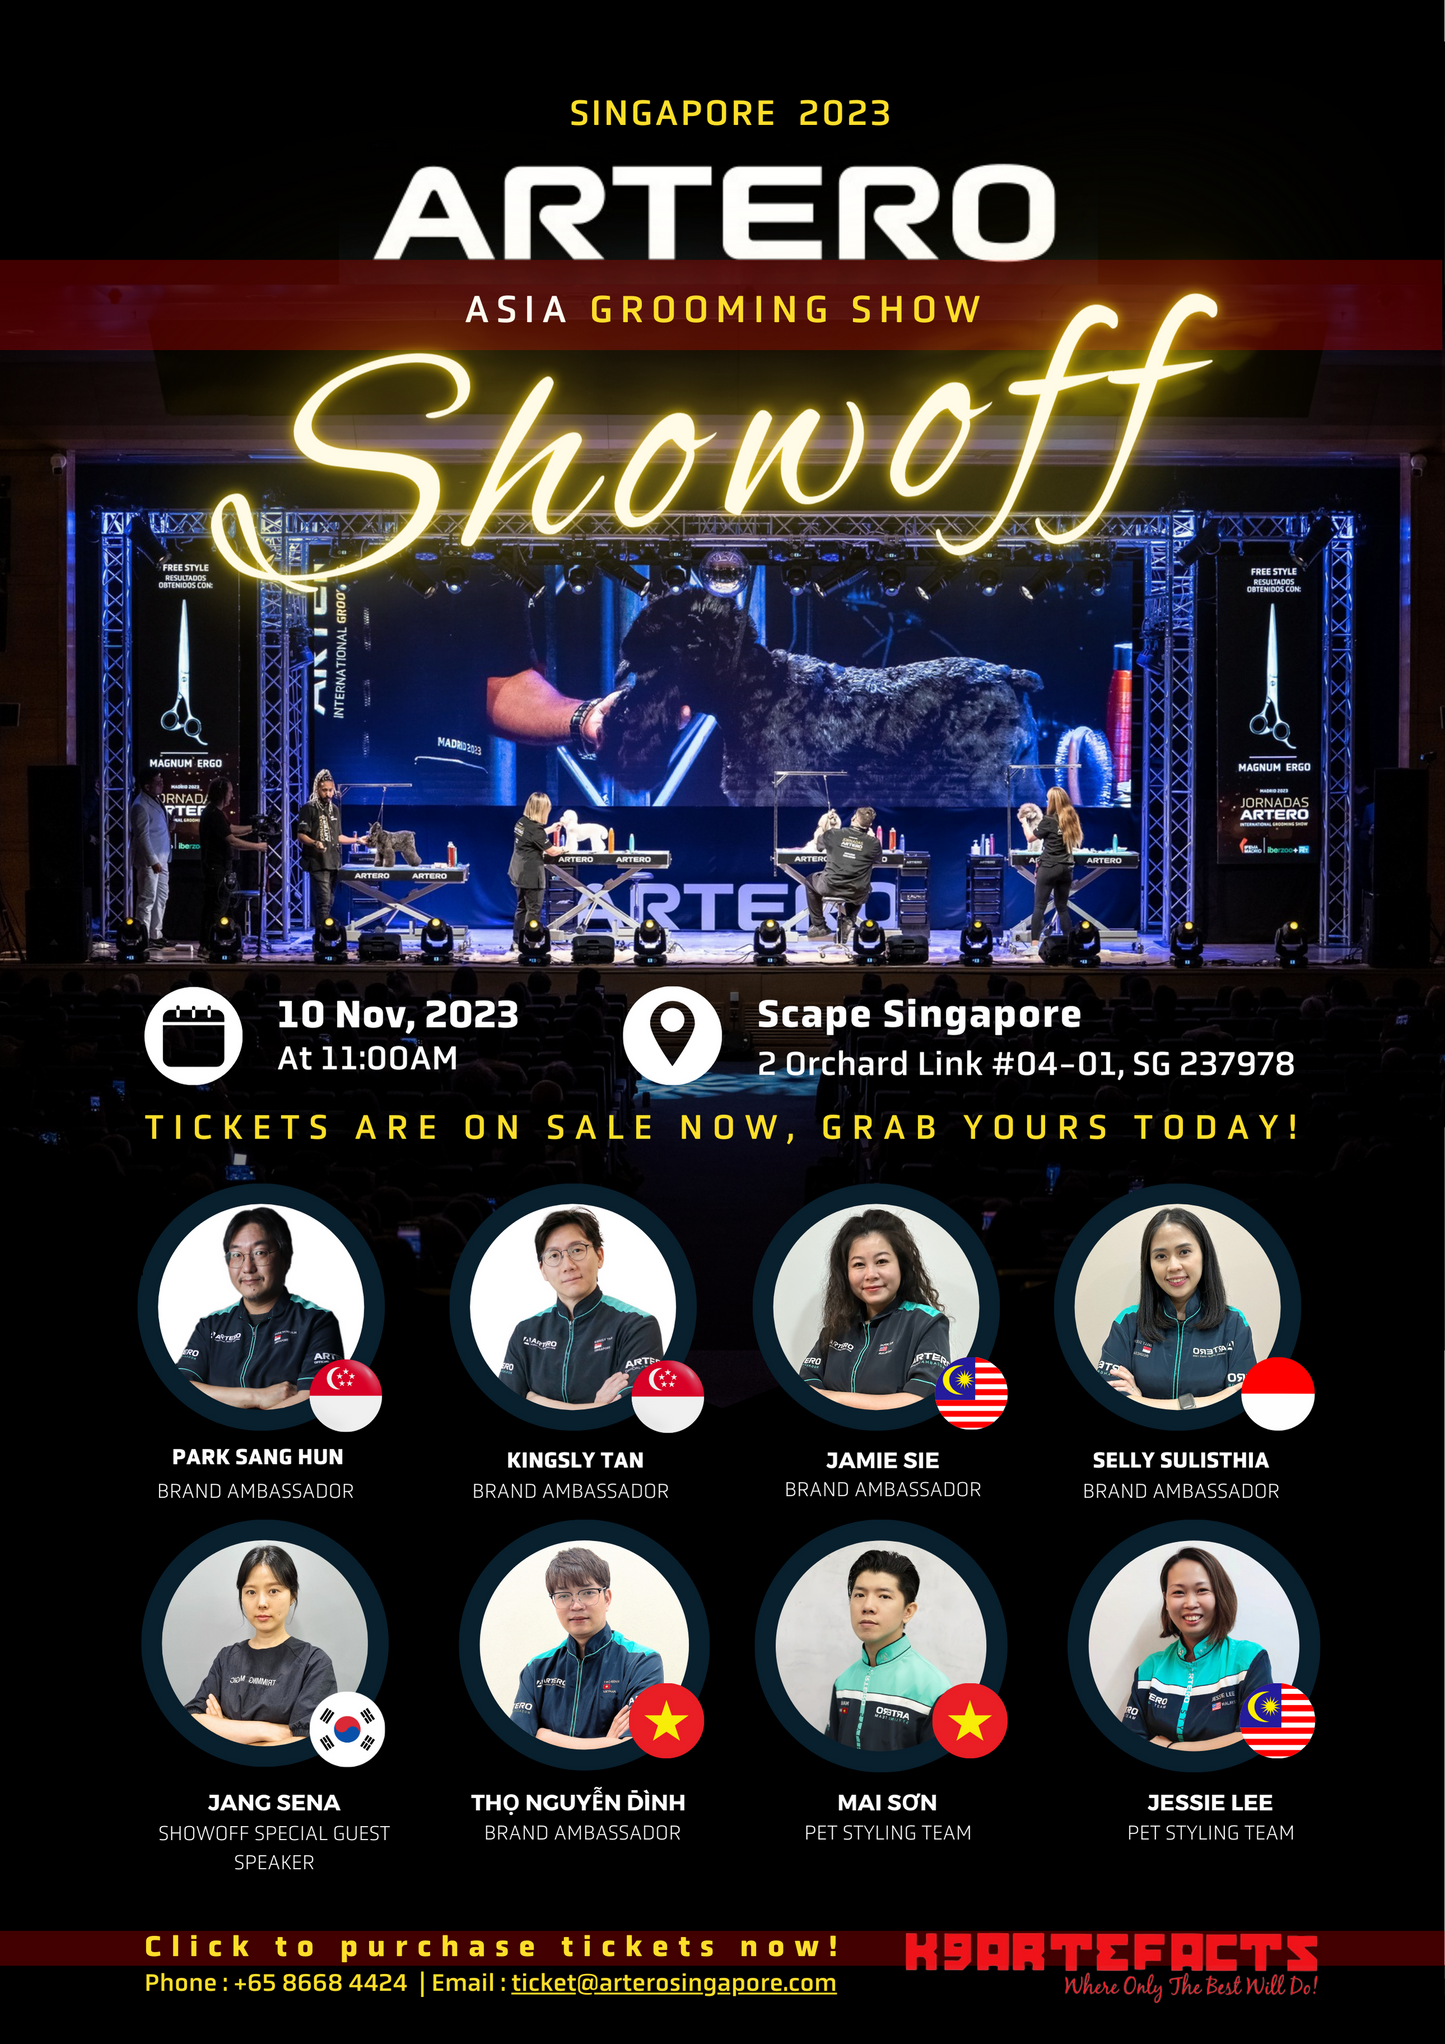 ARTERO SHOWOFF Asia Grooming Show Ticket